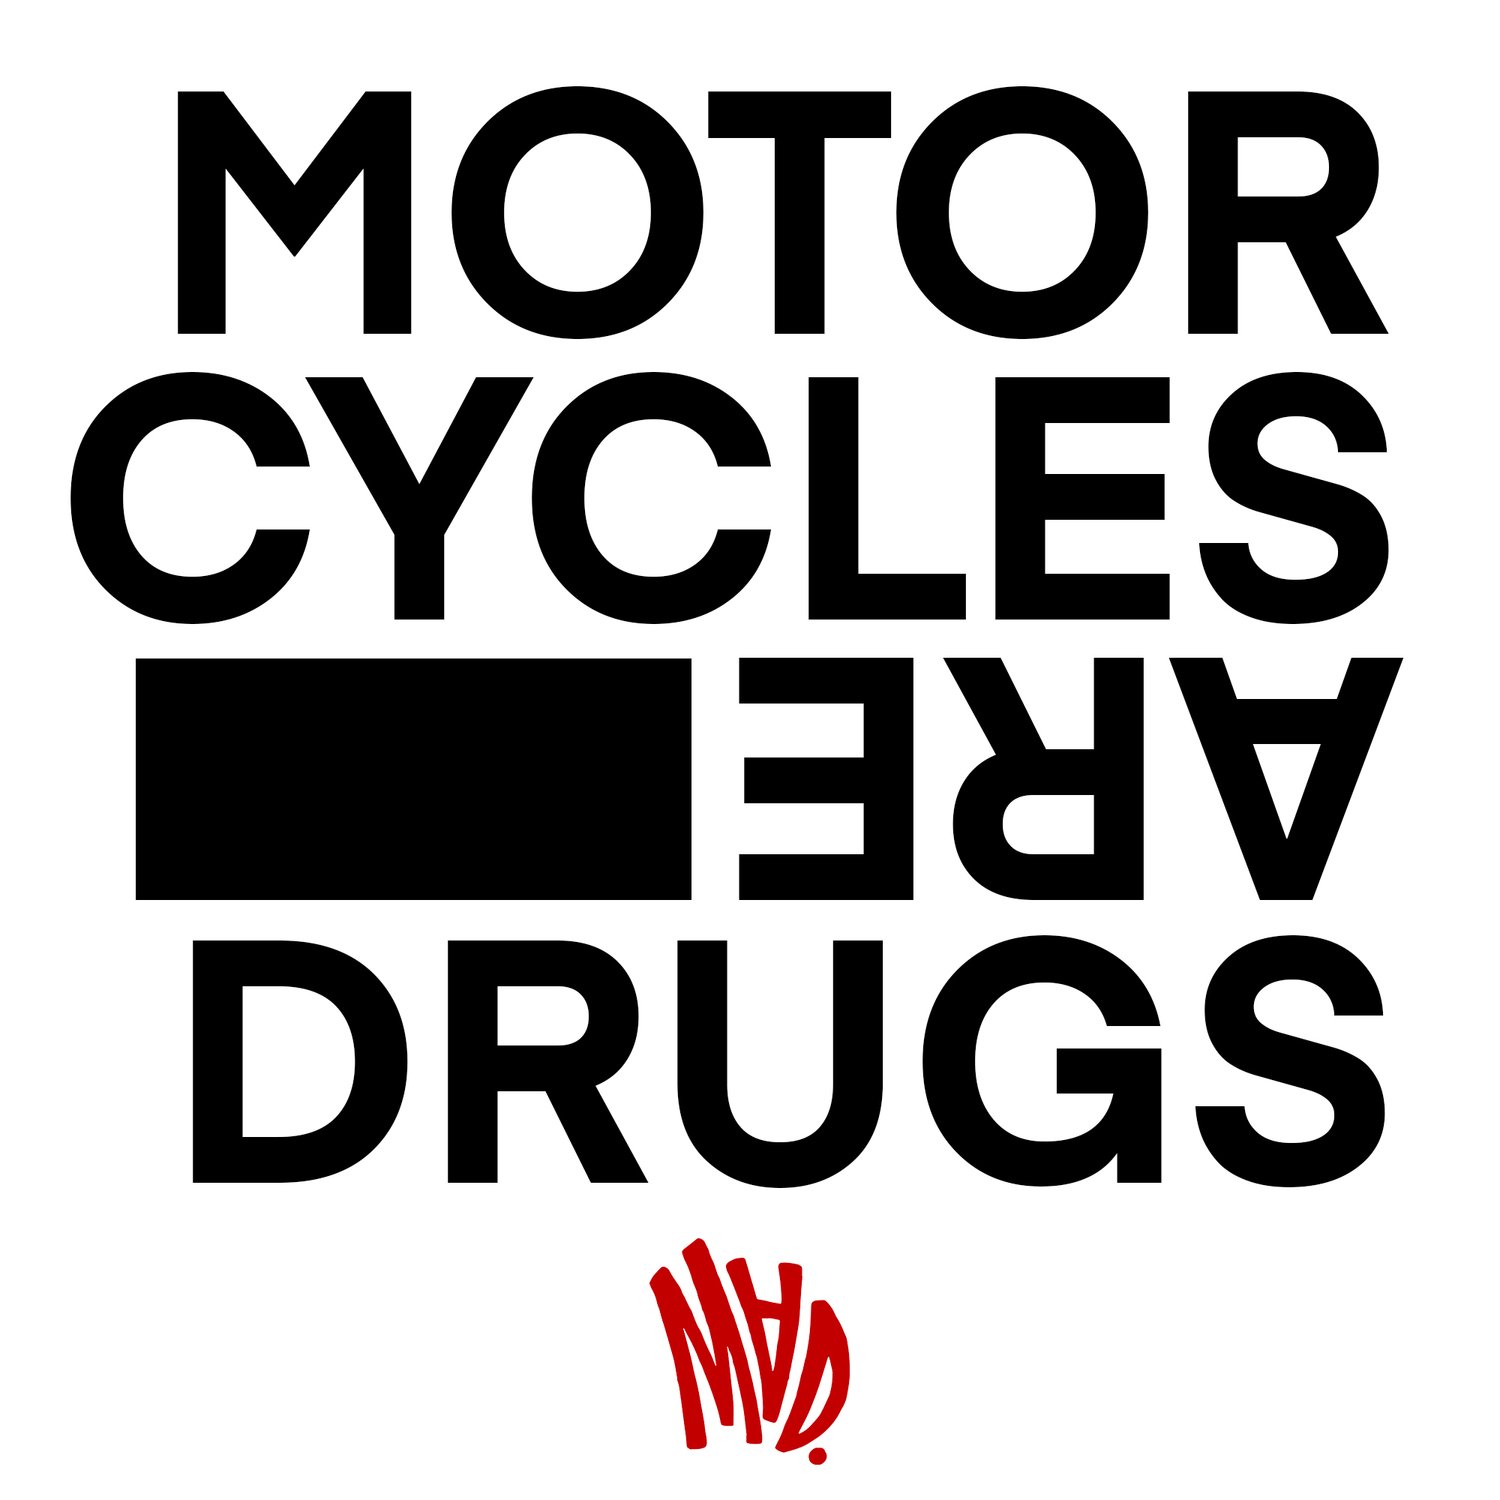 MOTORCYCLES ARE DRUGS™